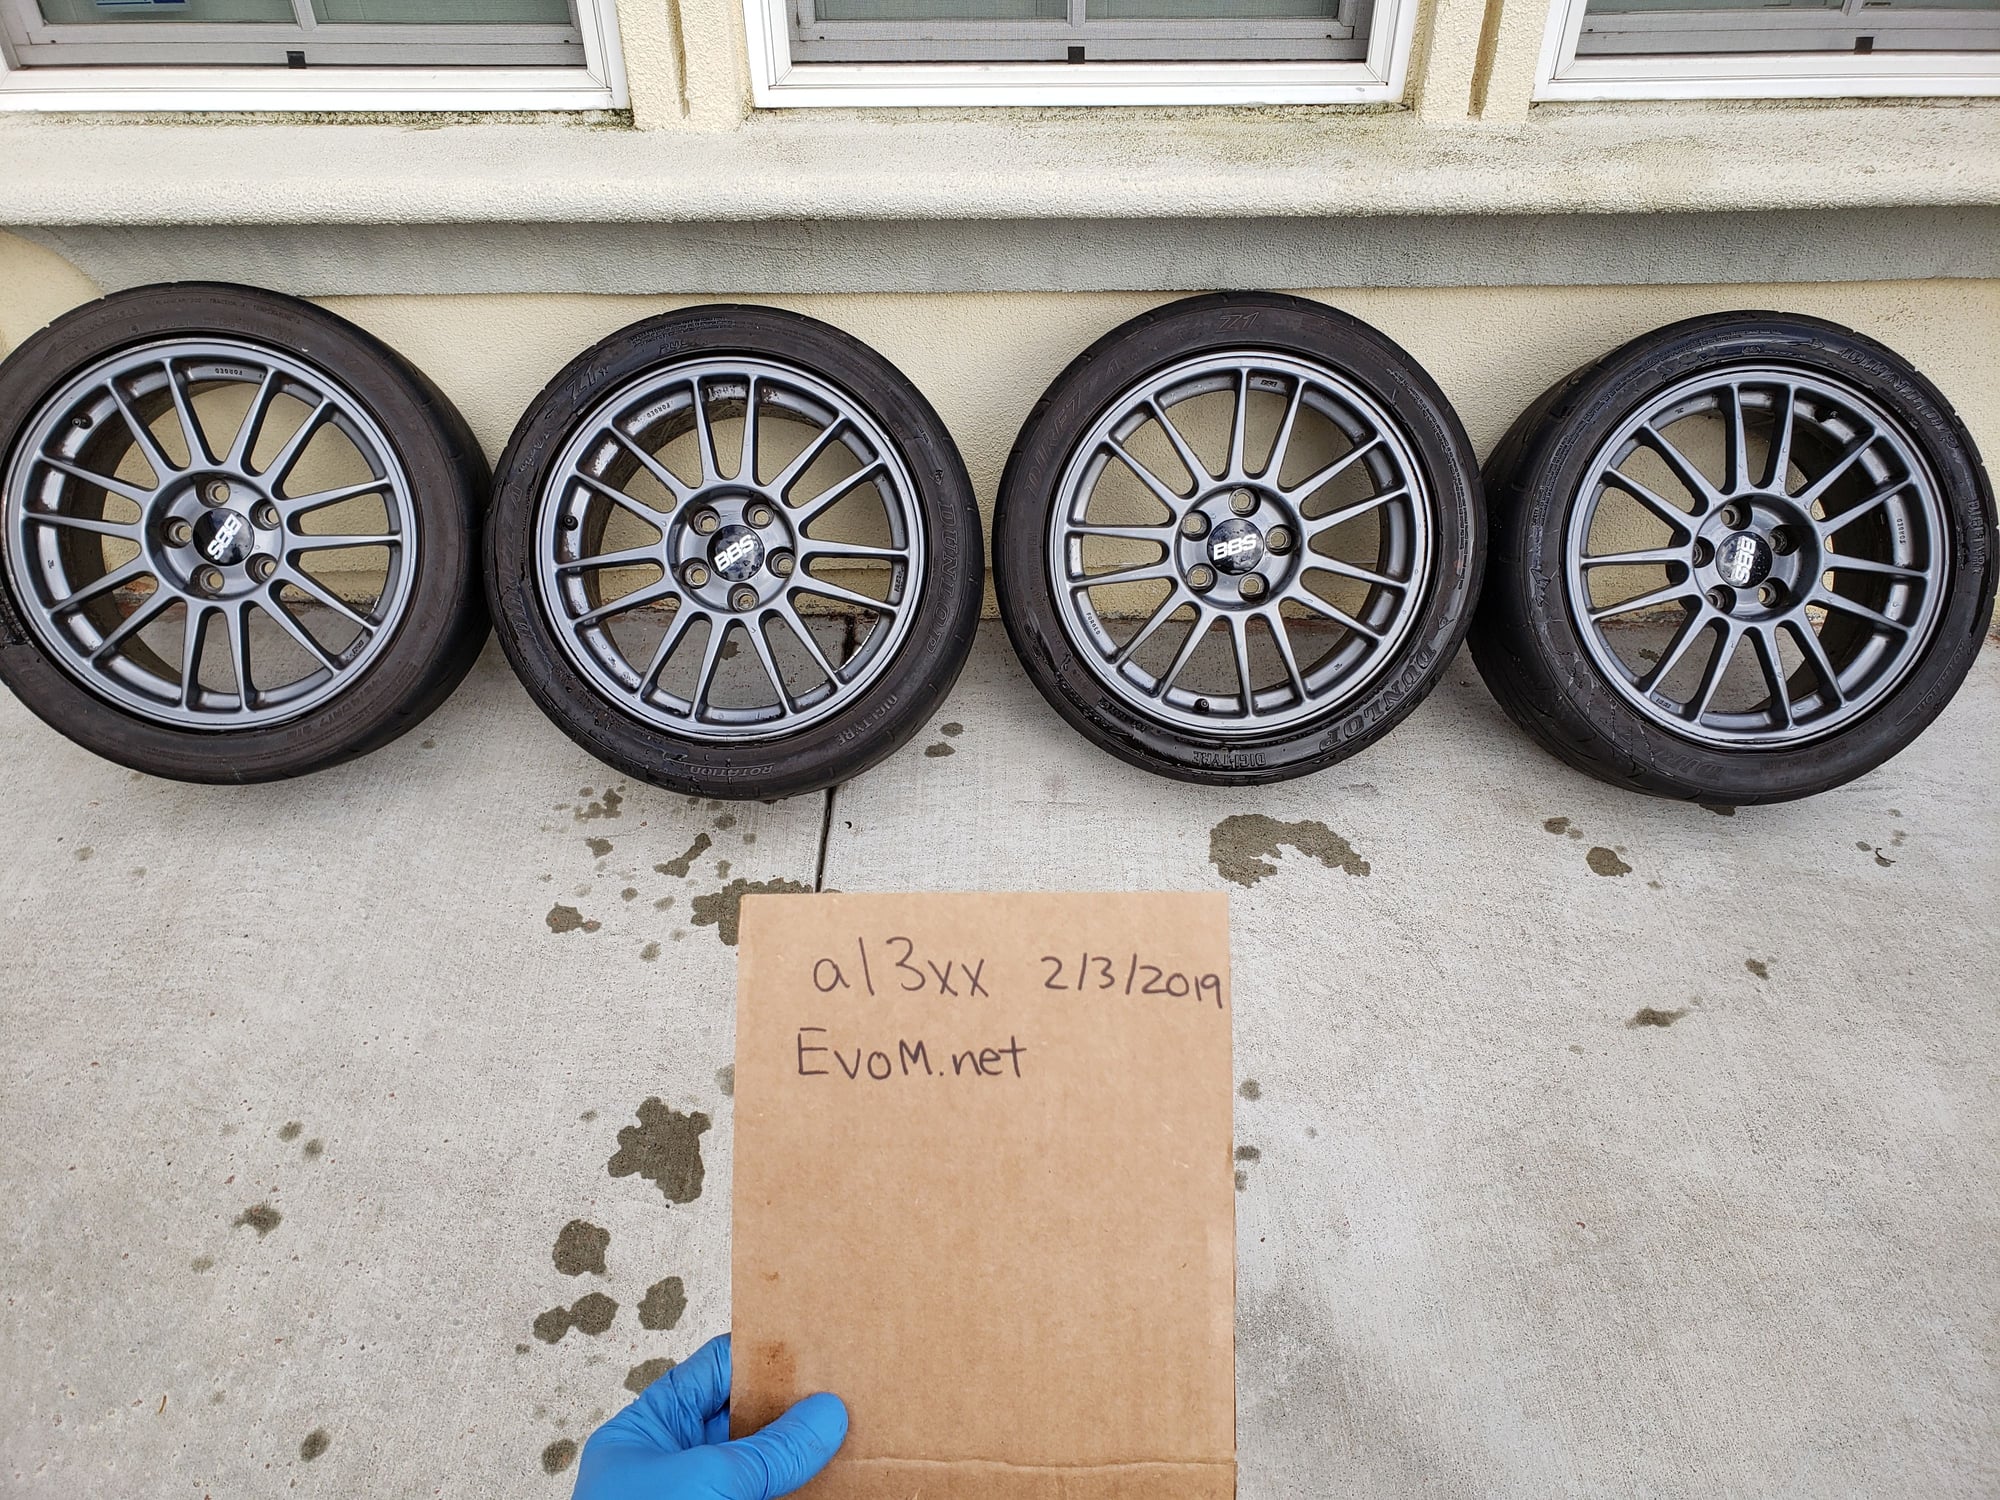 Wheels and Tires/Axles - [FS] OEM BBS MR Wheels & Tires (4) - Used - 2003 to 2006 Mitsubishi Lancer Evolution - Alameda, CA 94501, United States